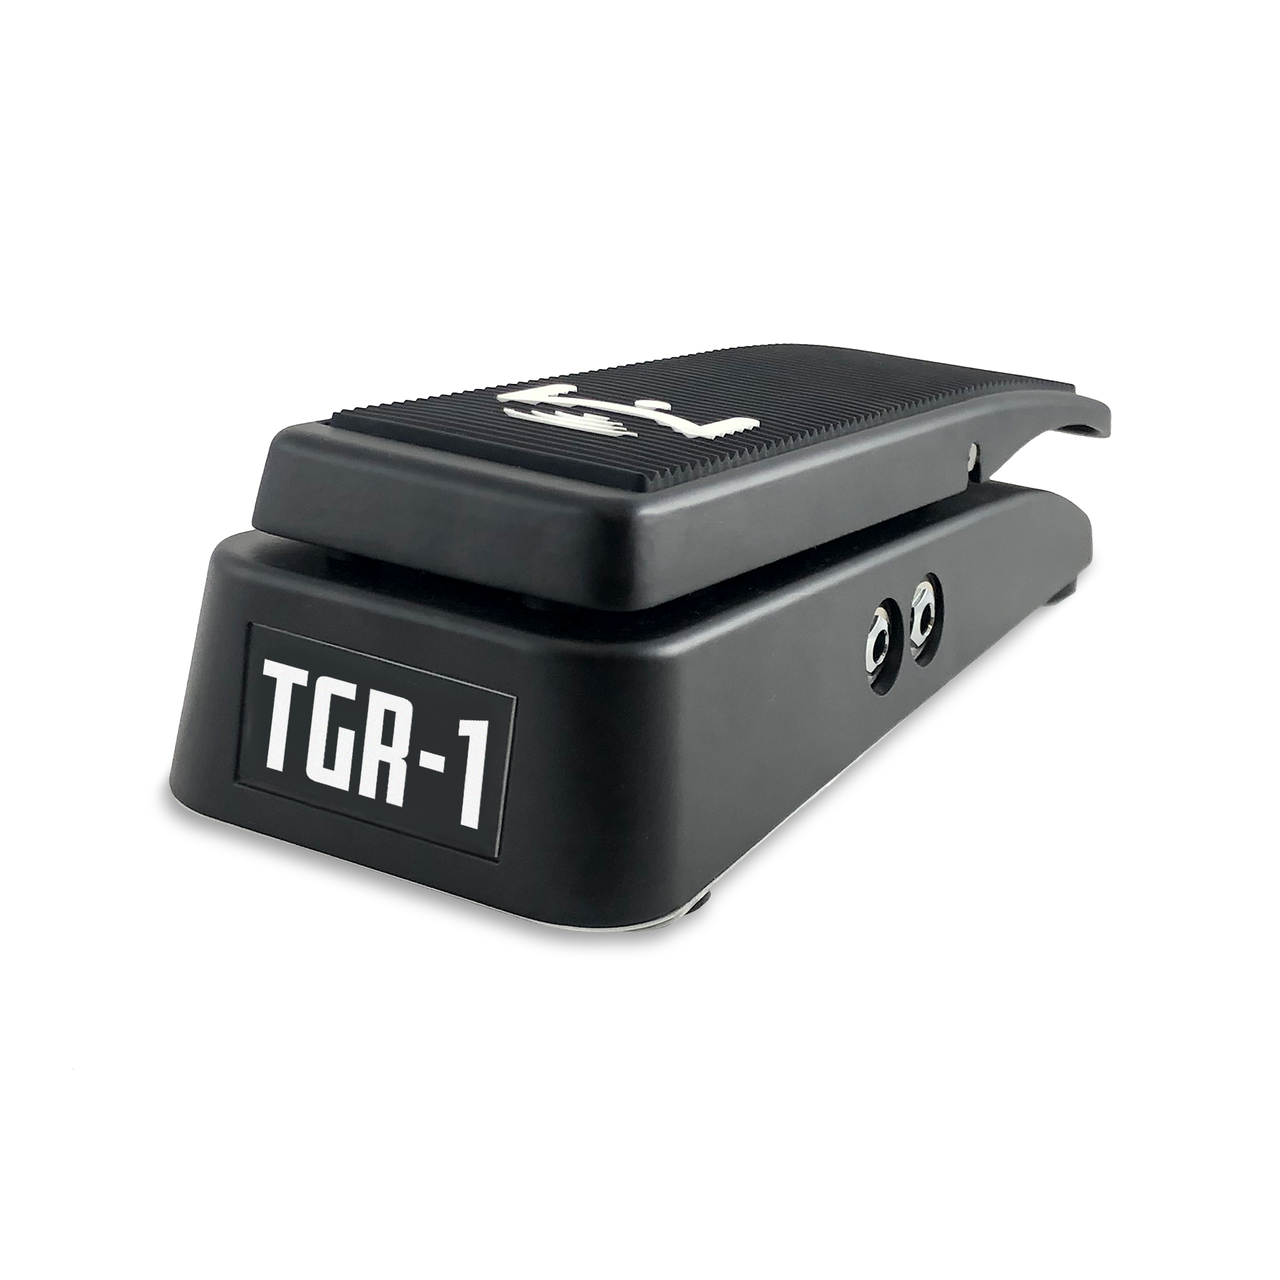 TGR-1 Expression pedal by Mission Engineering